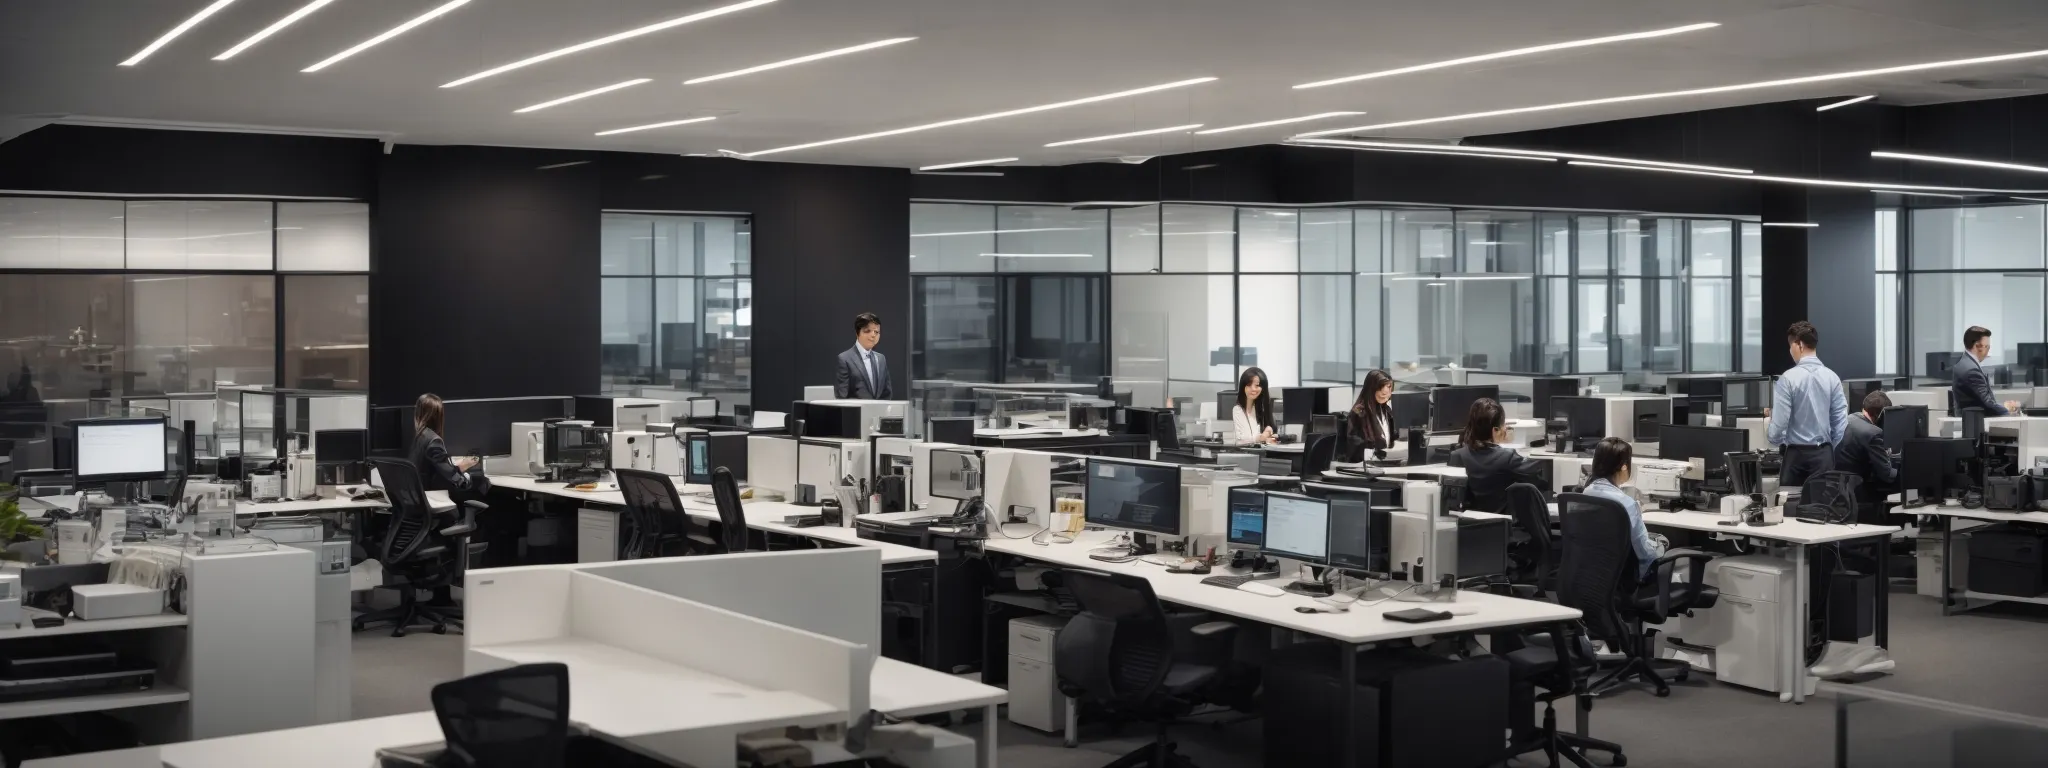 a sleek, modern office with an open-floor plan and employees engaging with sophisticated computer systems.